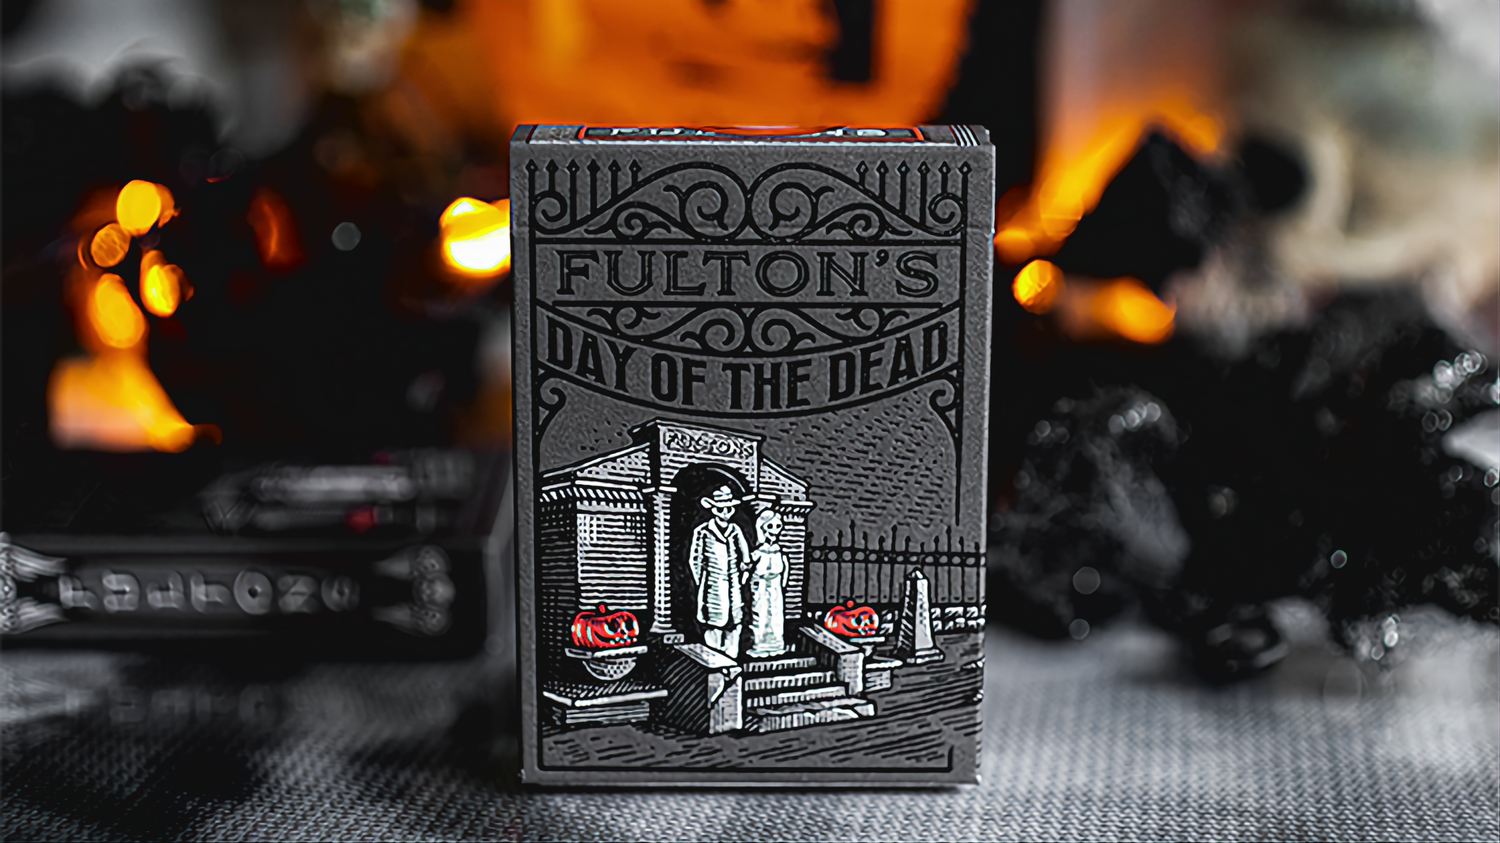 Day of the Dead by Fulton's : Playing cards , Poker , Magic , Cardistry Singapore